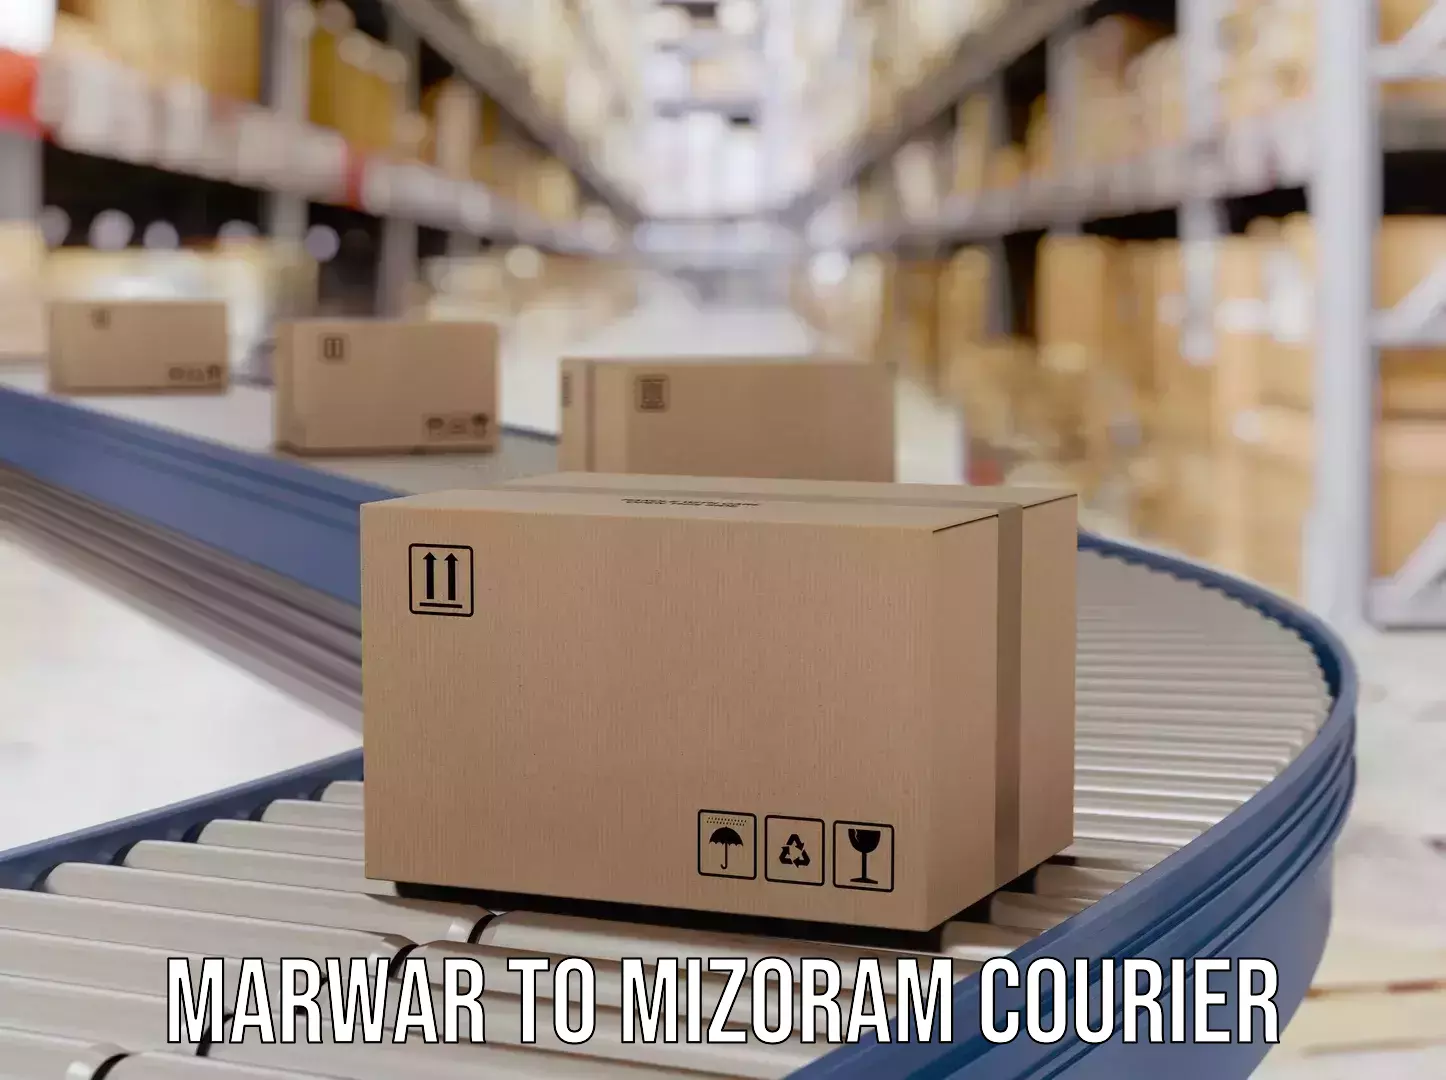 On-call courier service Marwar to Mizoram